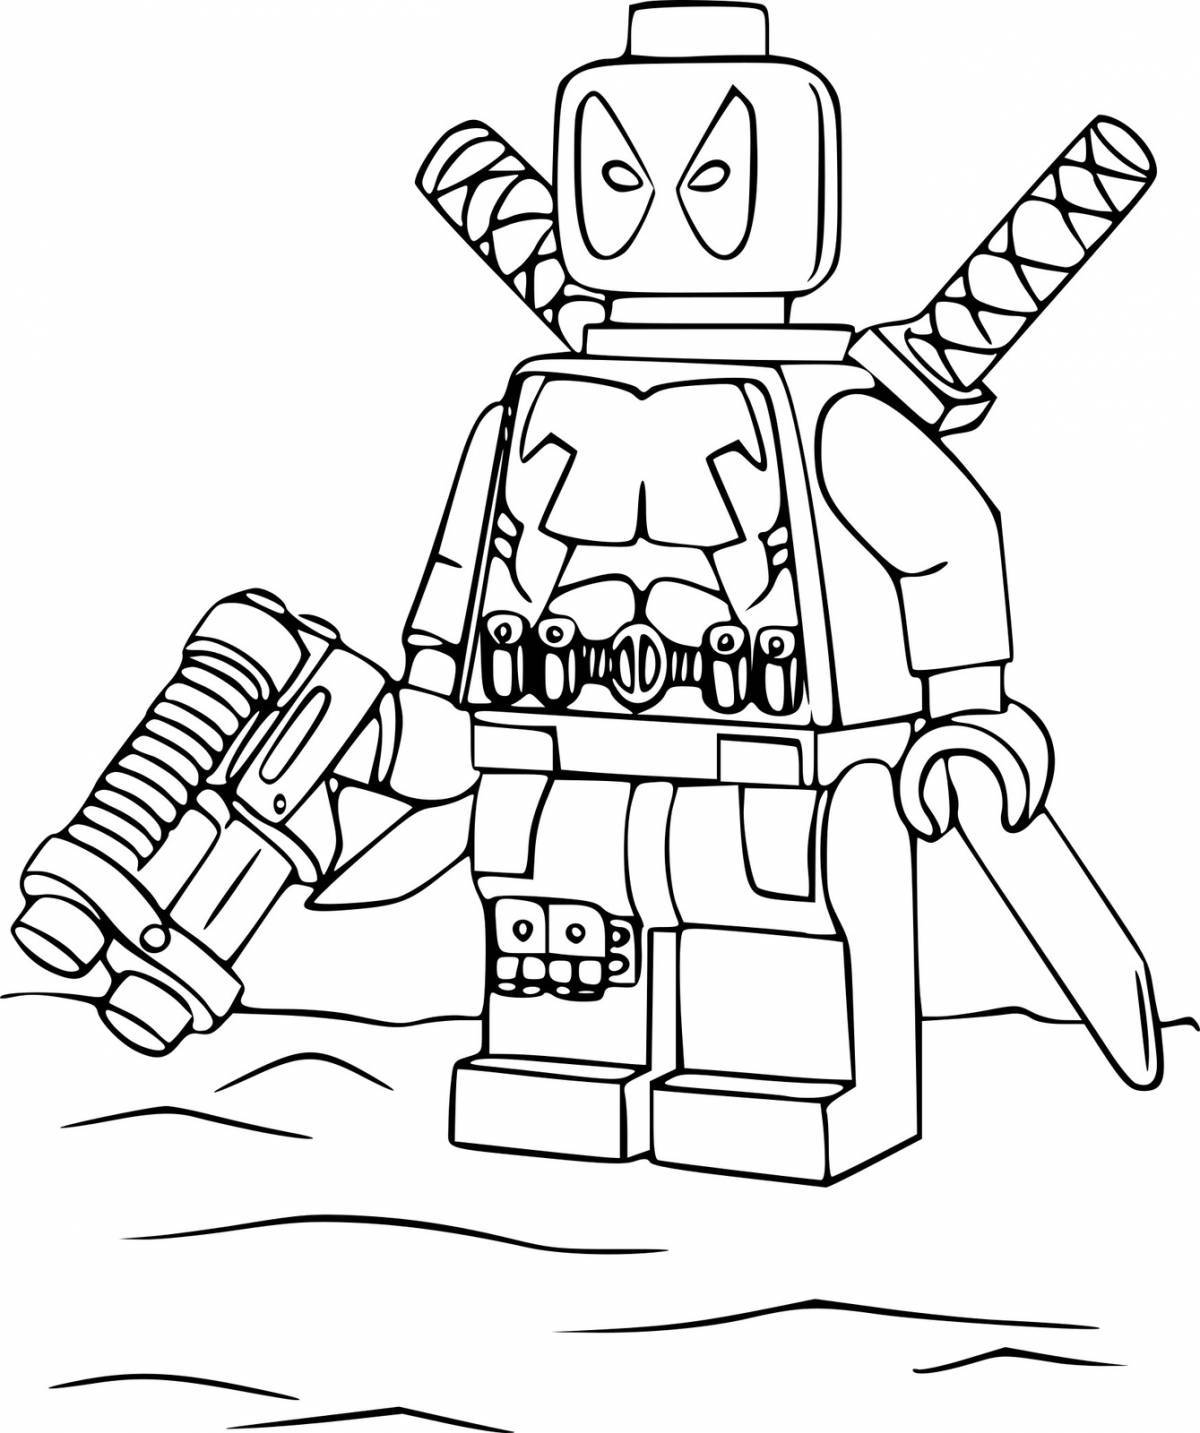 Color-bright lego coloring page for boys